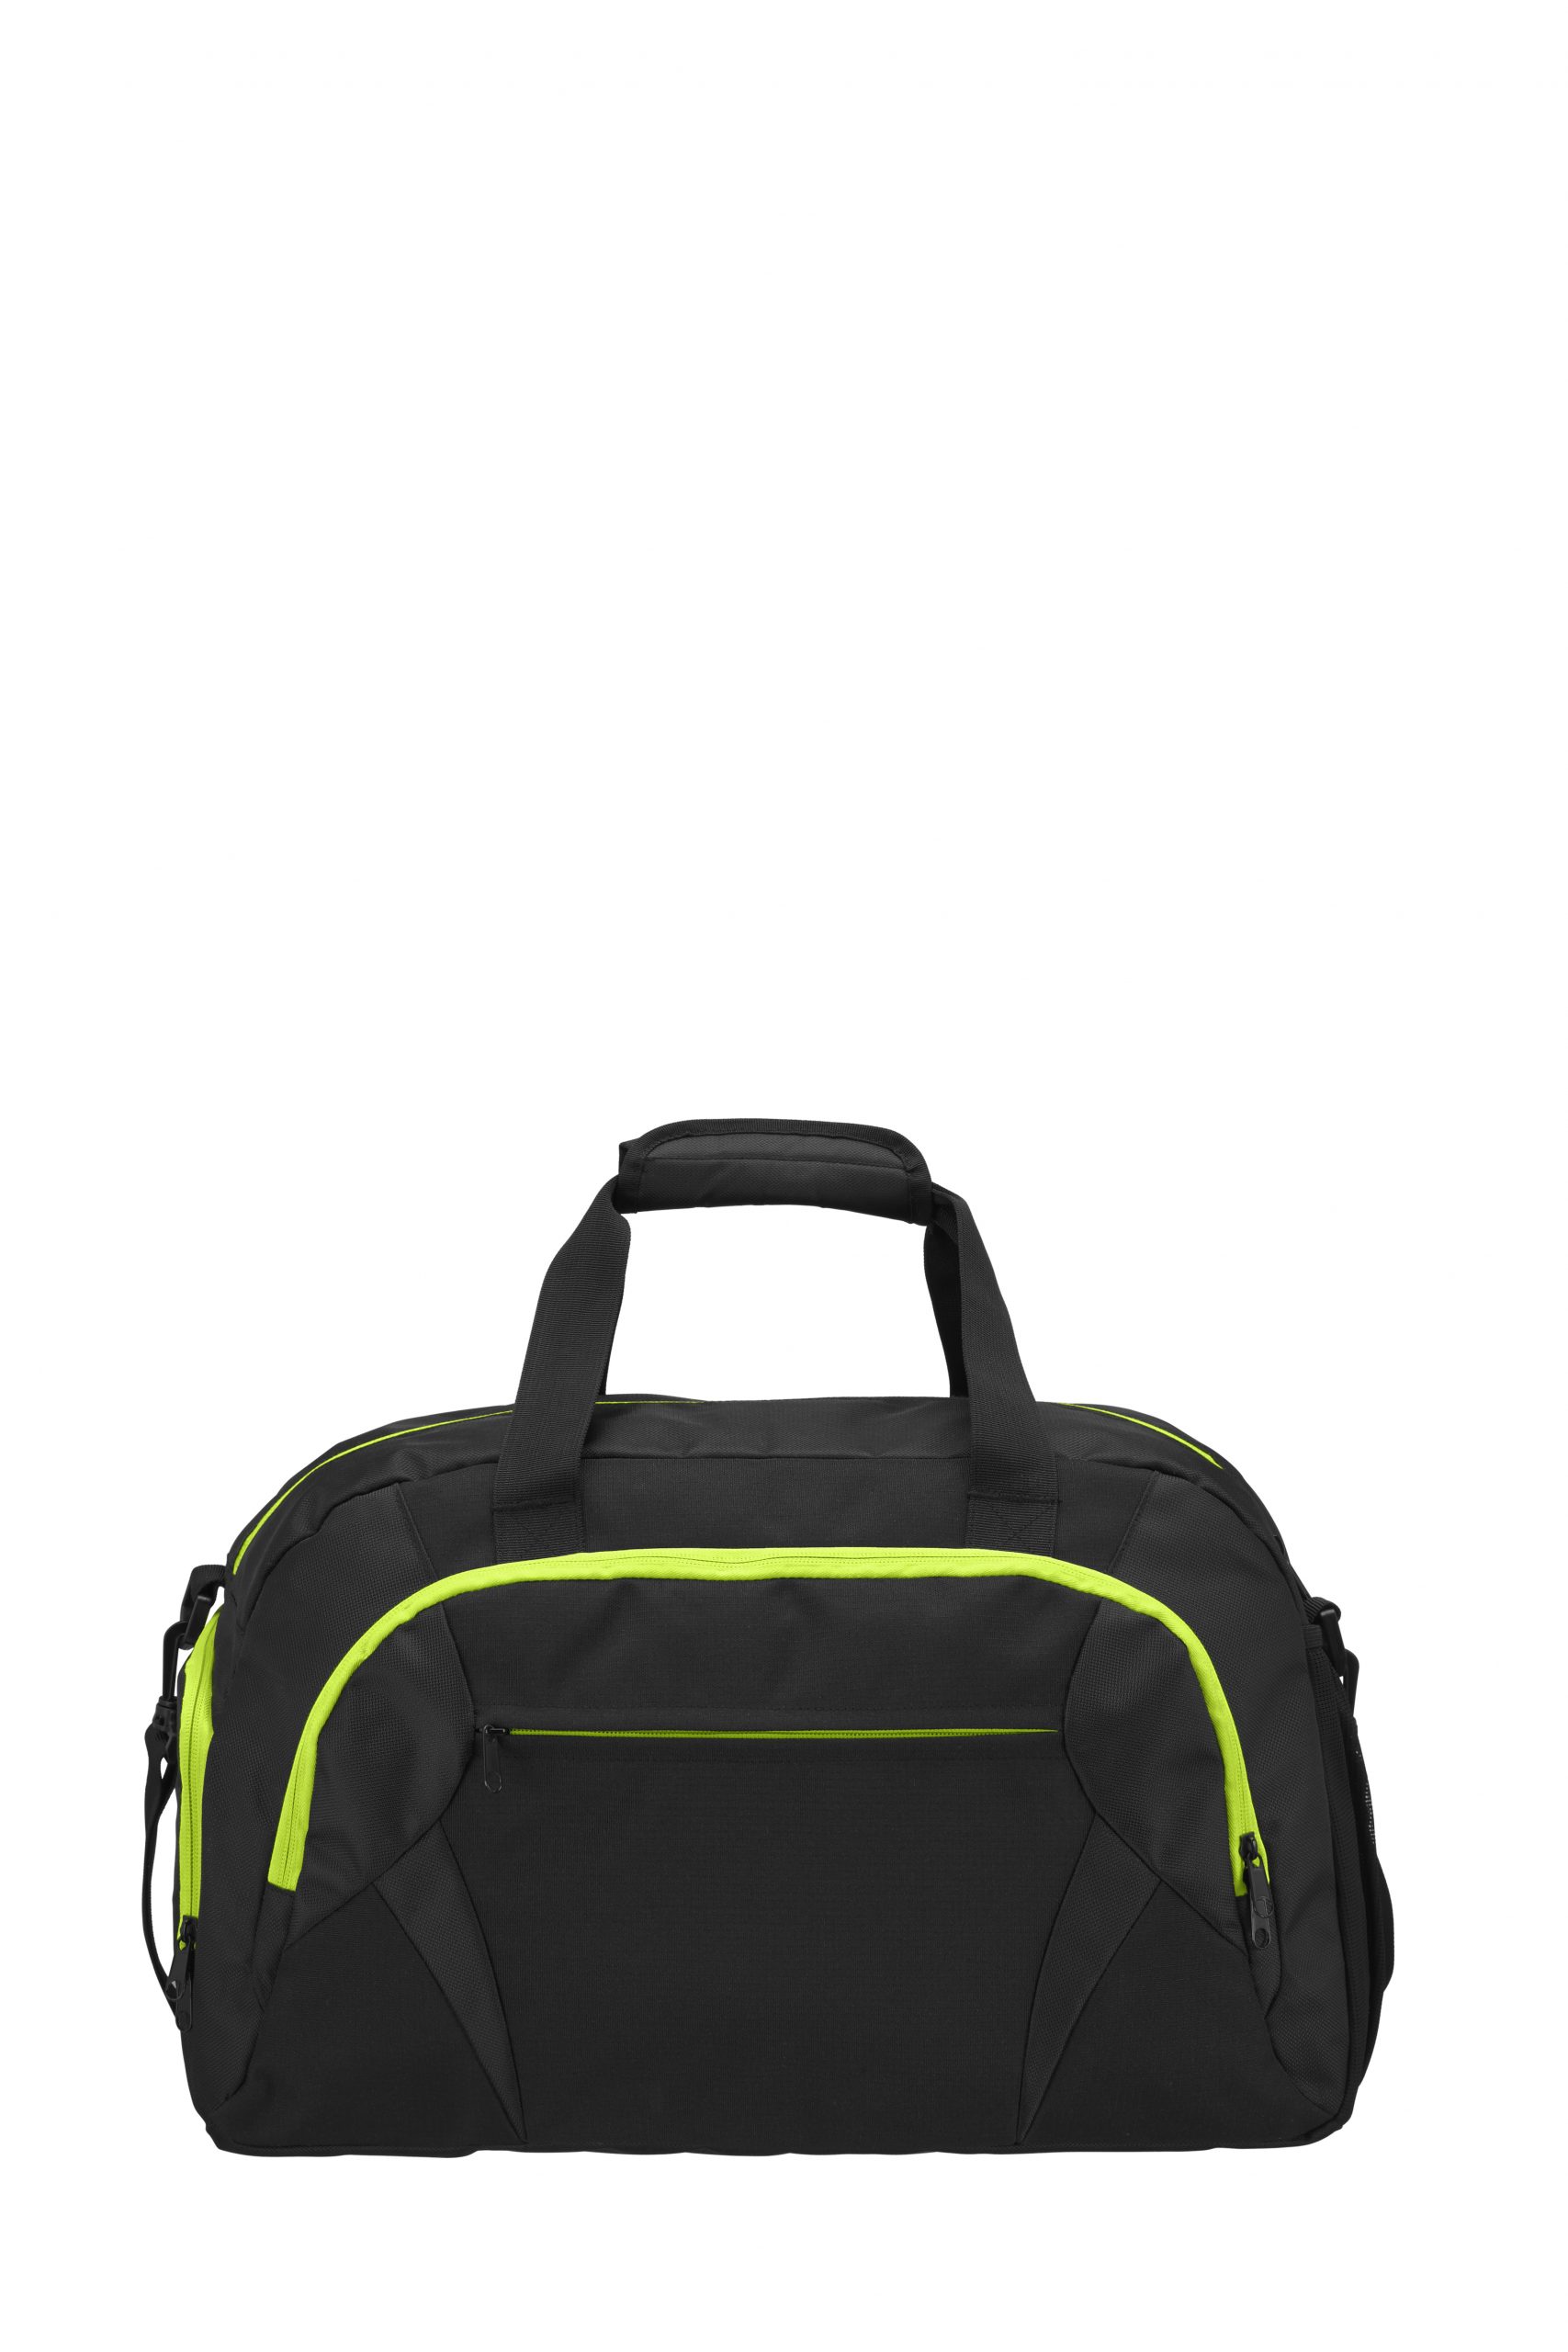 Grizzly Active Line Sportbag big musta/keltainen